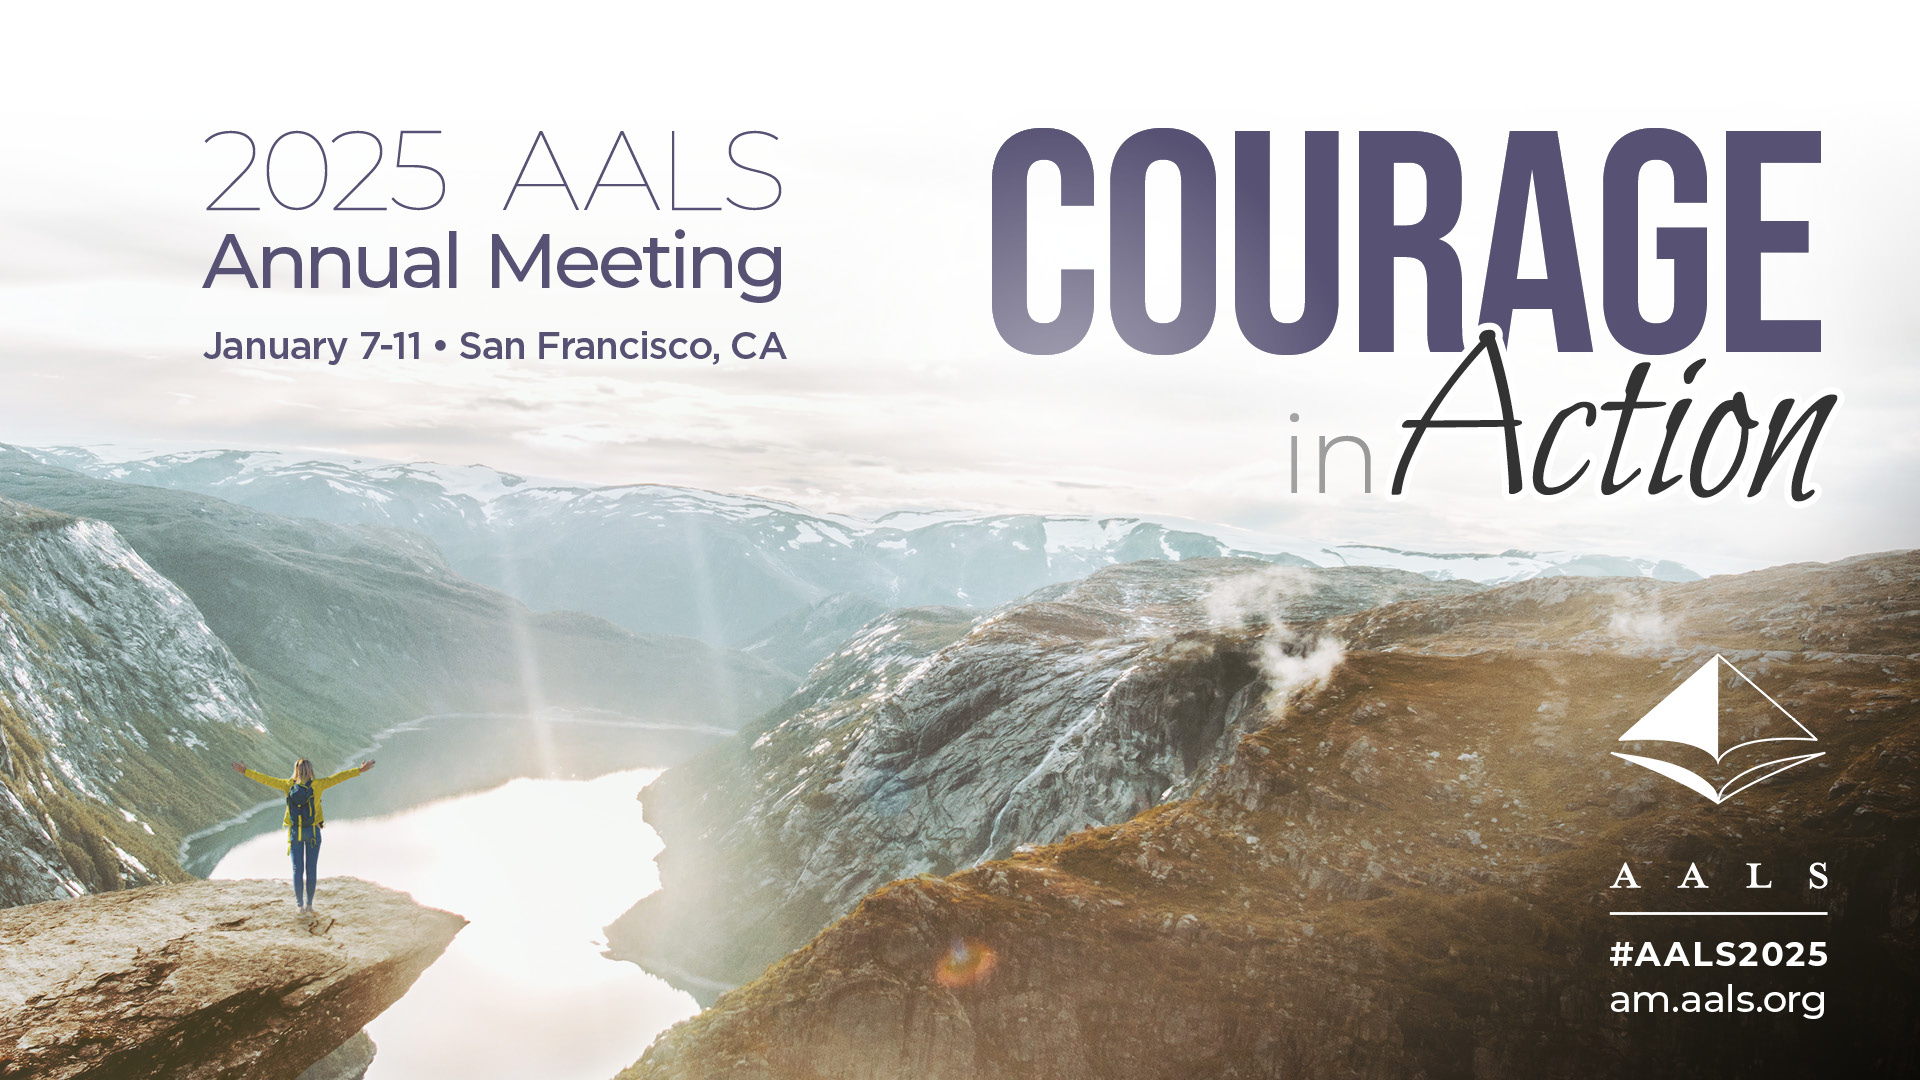 AALS 2025 Annual Meeting Courage in Action January 7 - 11 San Francisco